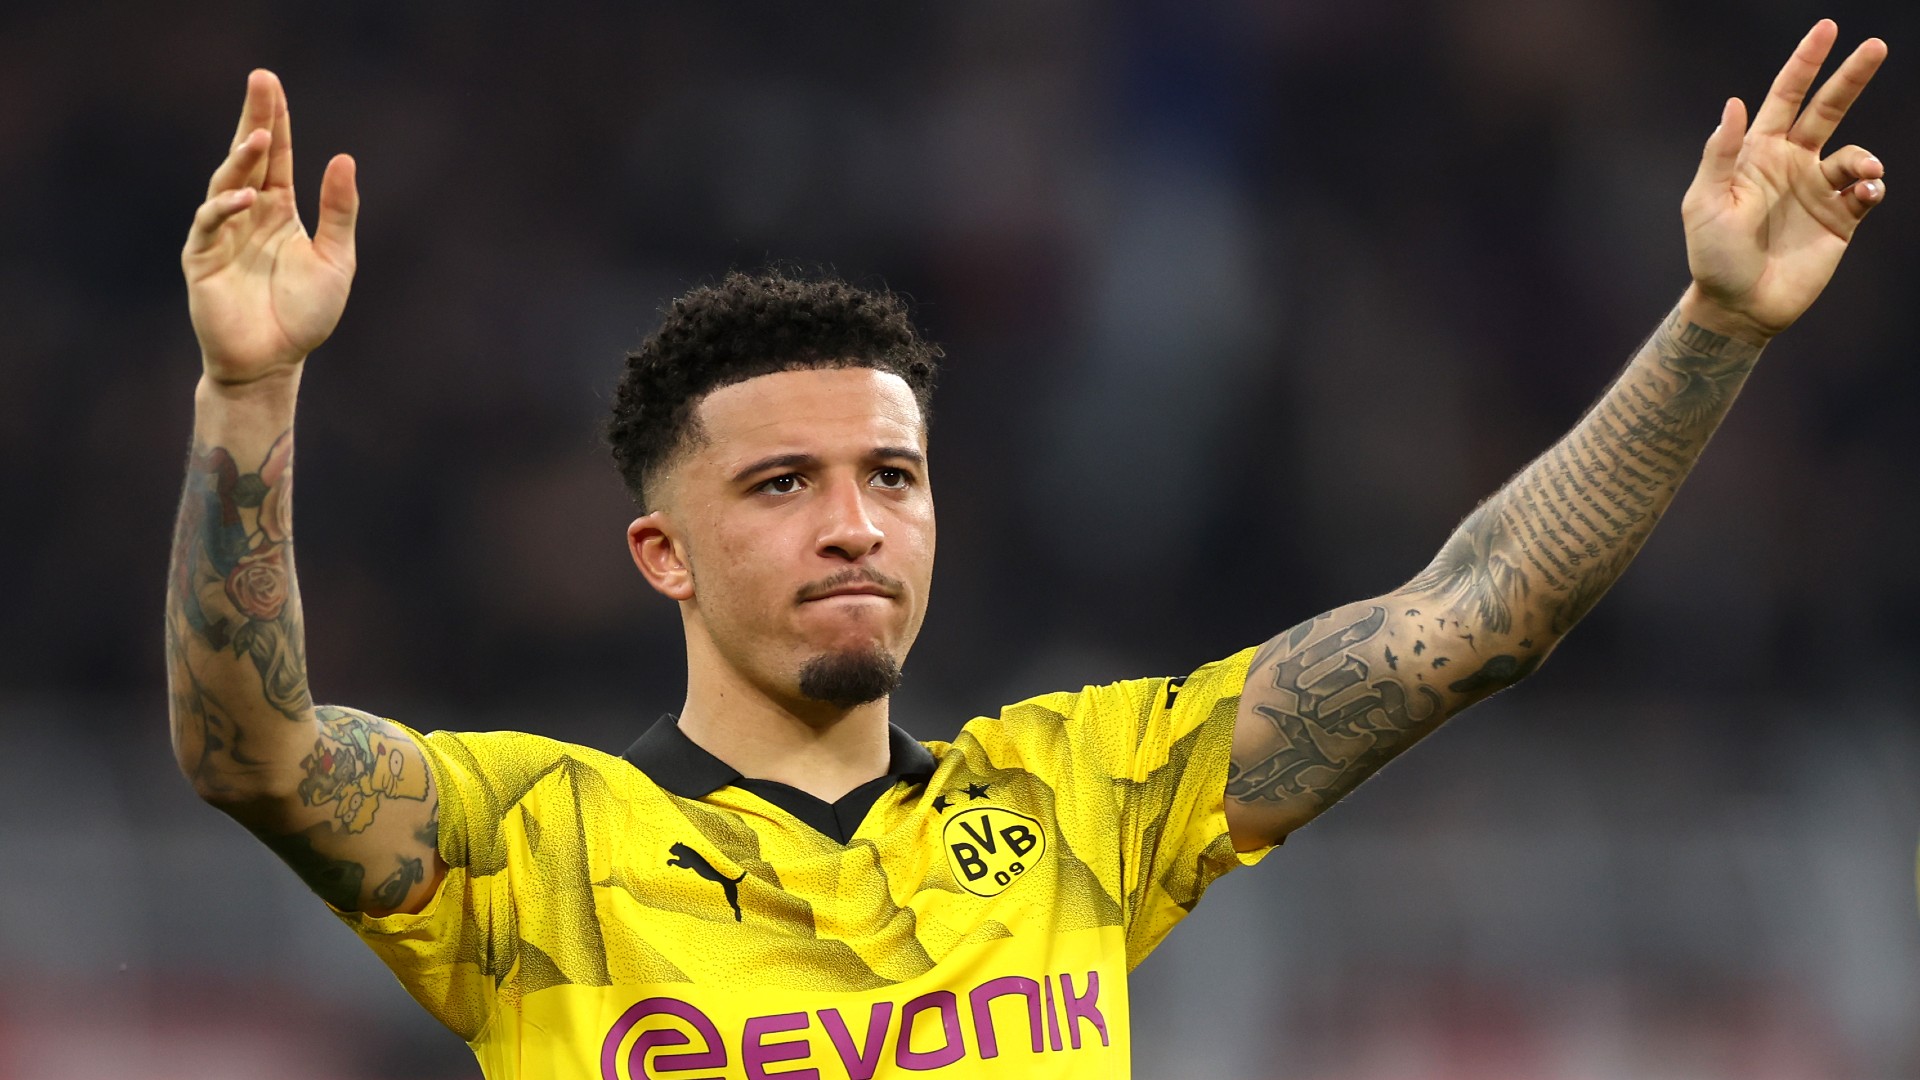 Sancho outshines Mbappe in BVB win